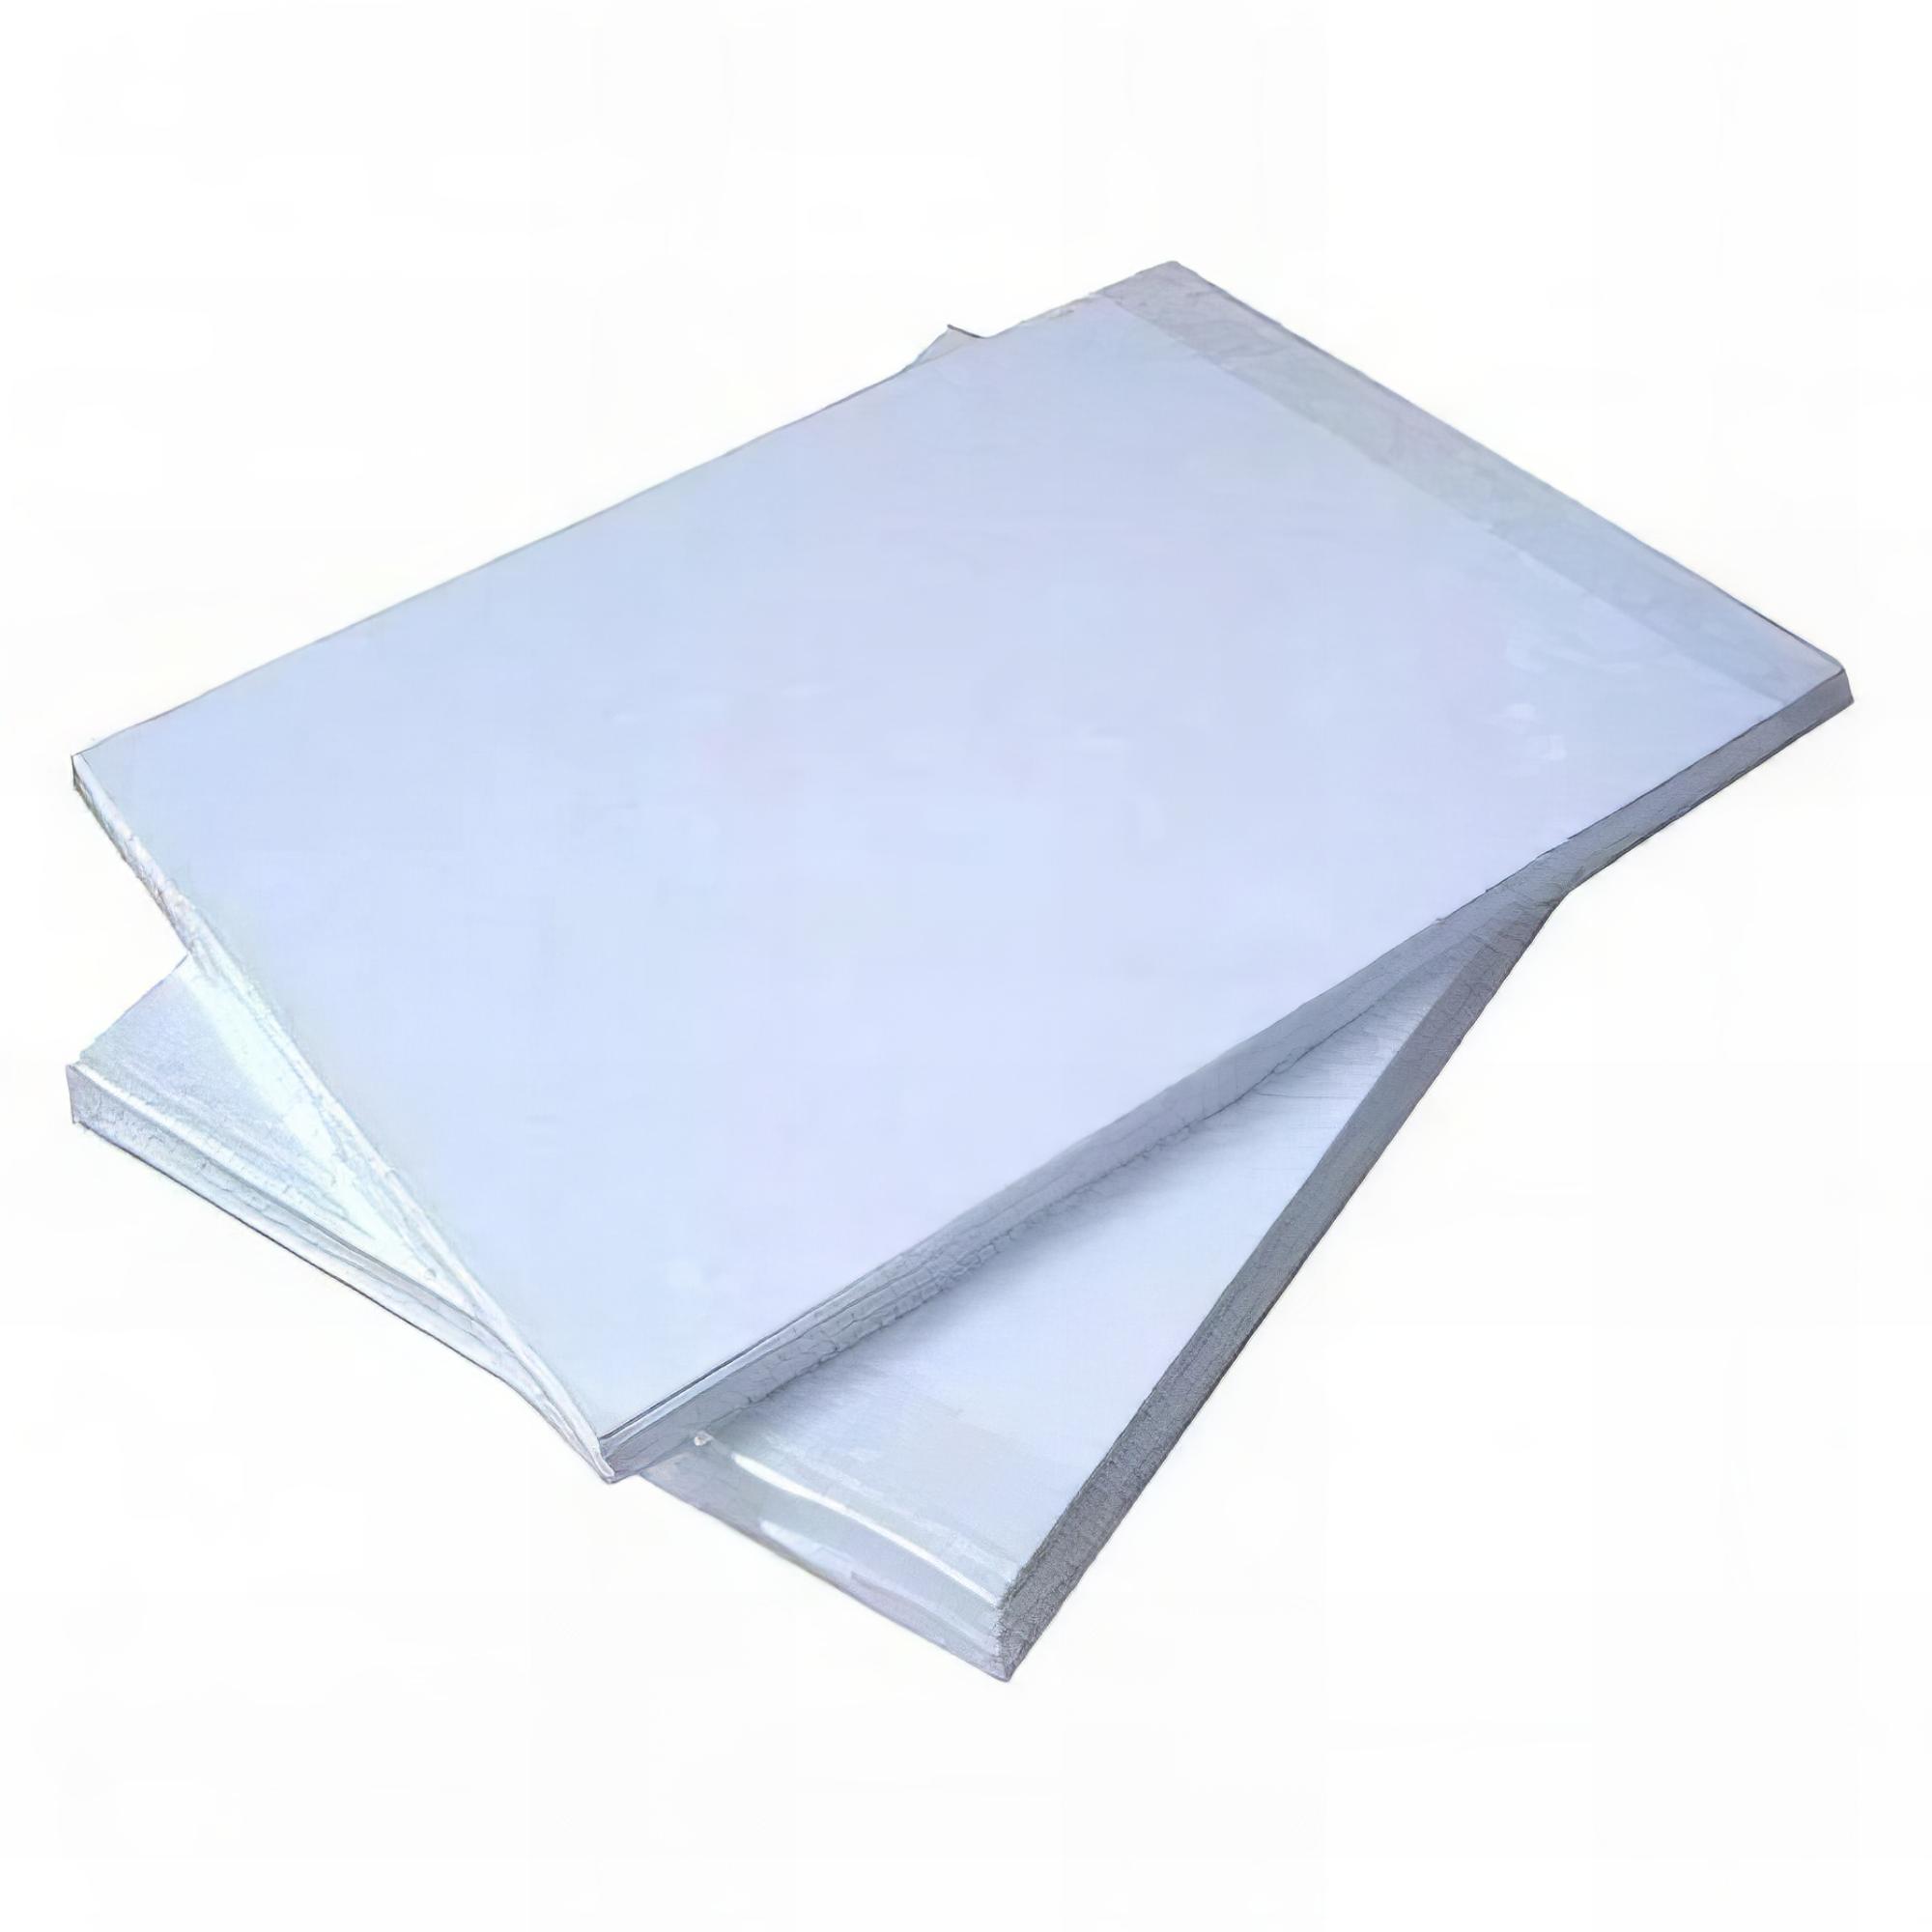 A3 Bubble Free Vinyl Sheet For Printing Custom Mobile and laptop Skins Wrapping